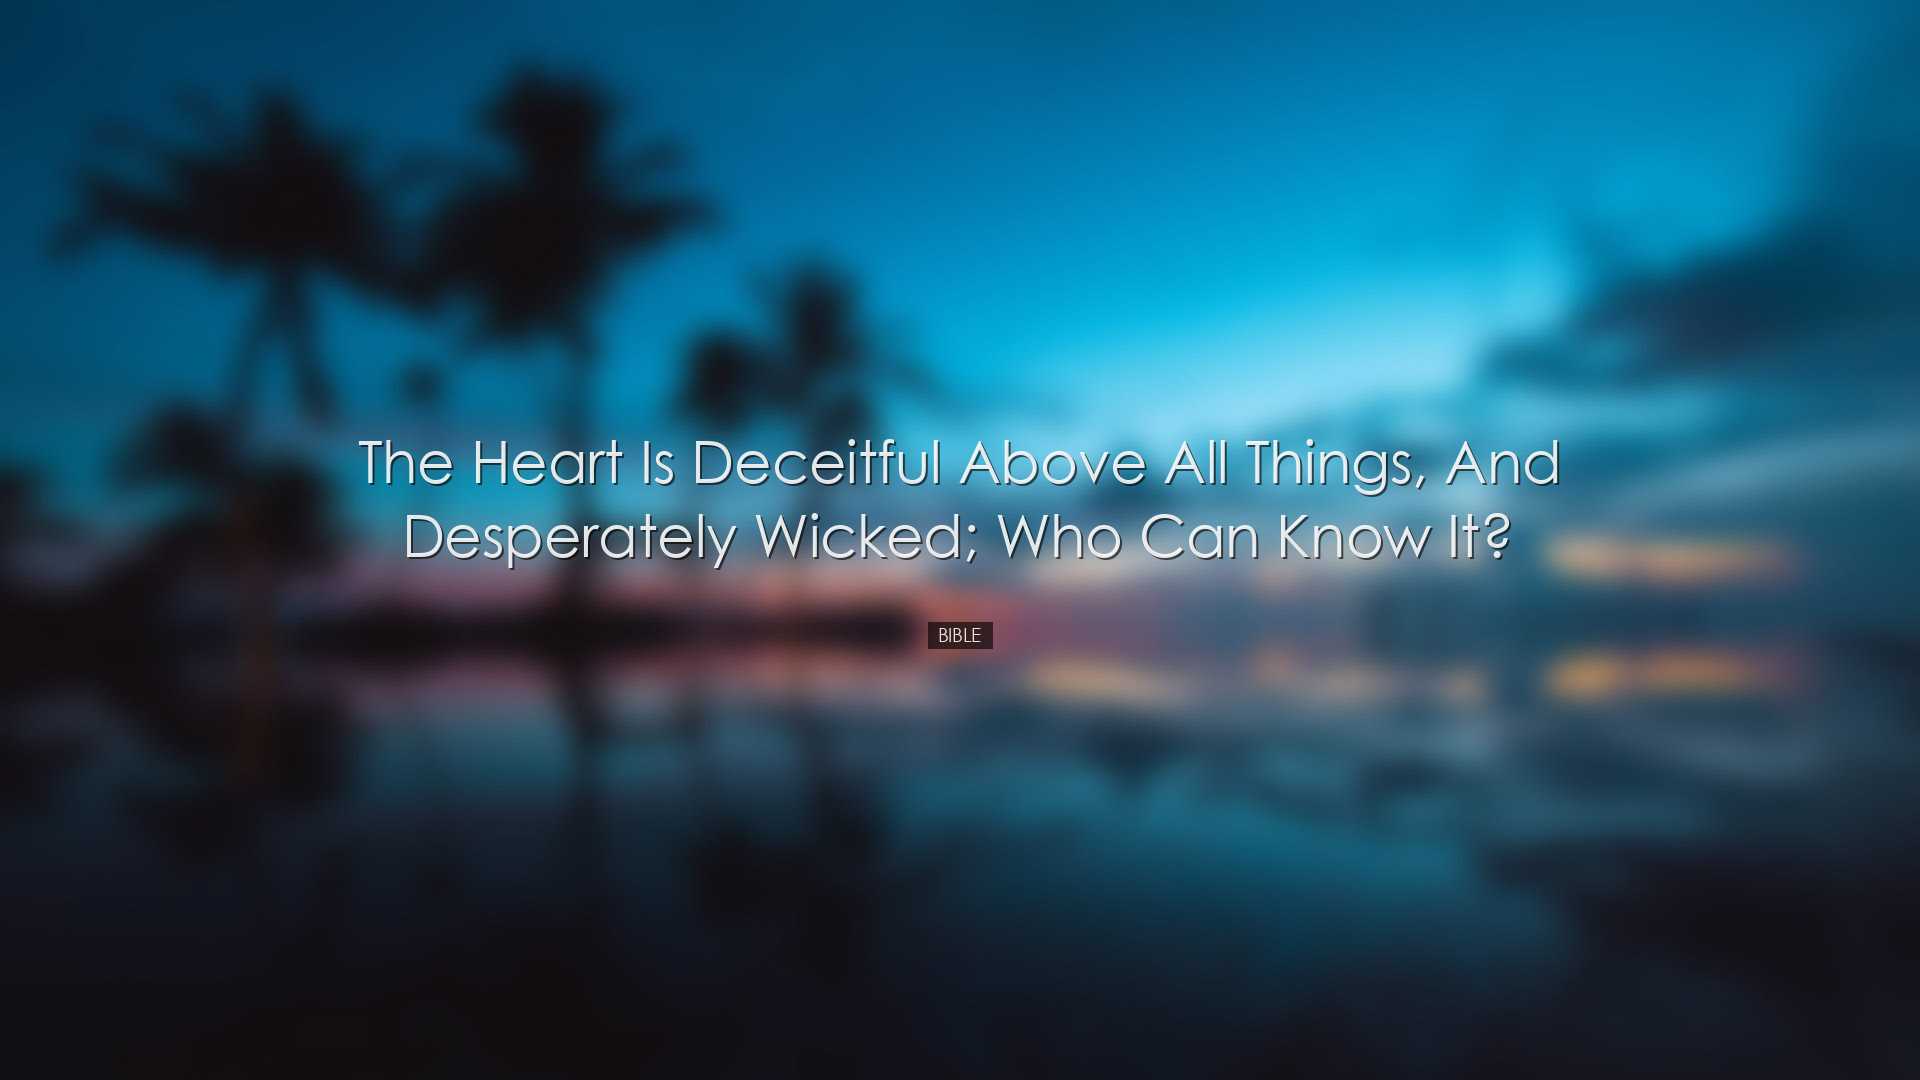 The heart is deceitful above all things, and desperately wicked; w